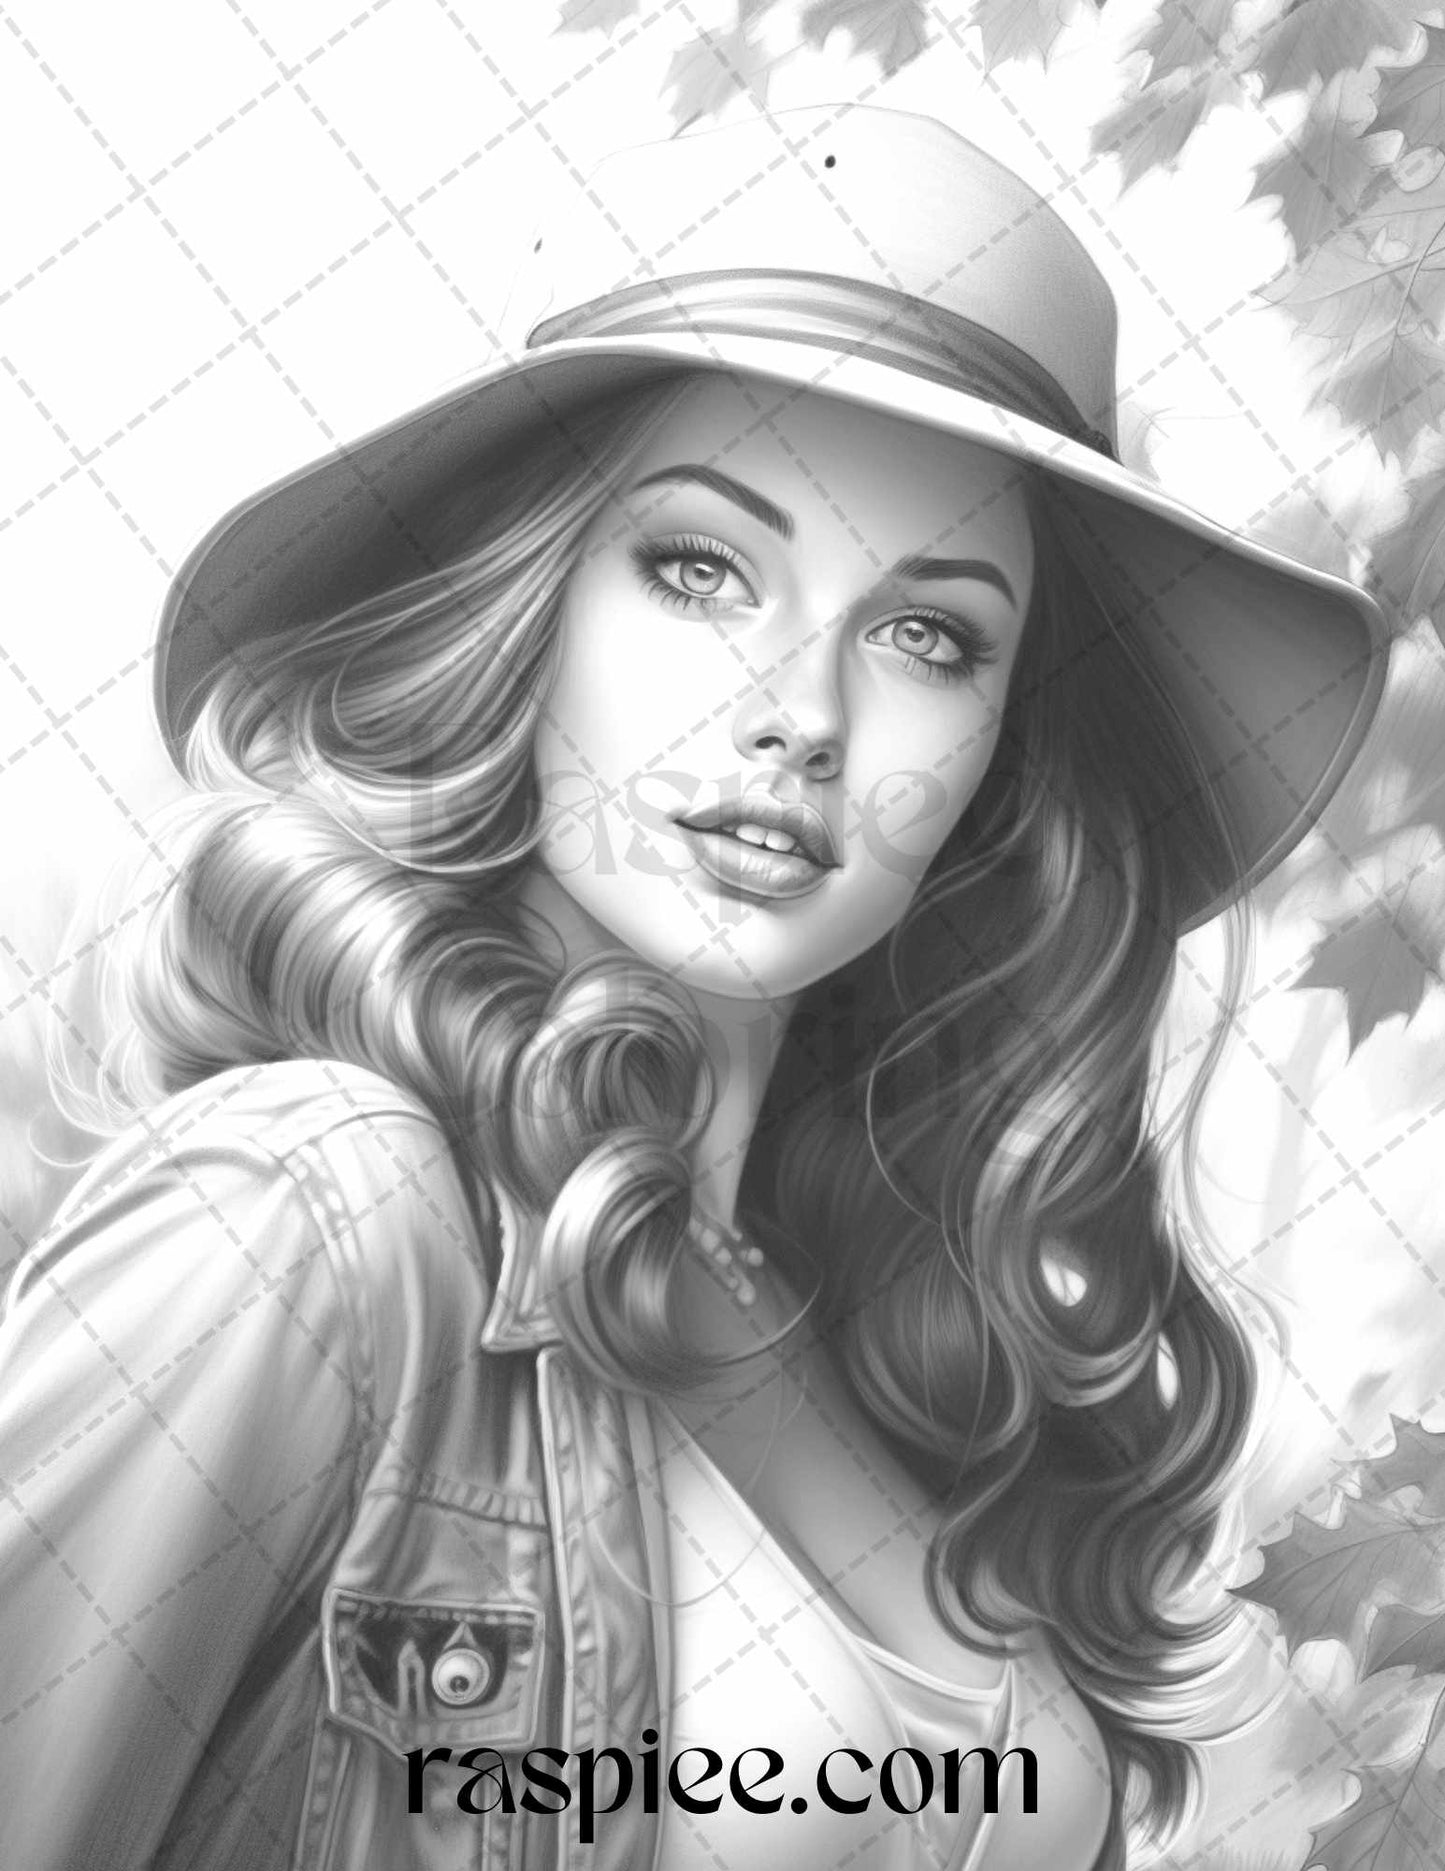 55 Autumn Pin Up Girls Grayscale Coloring Pages Printable for Adults, PDF File Instant Download